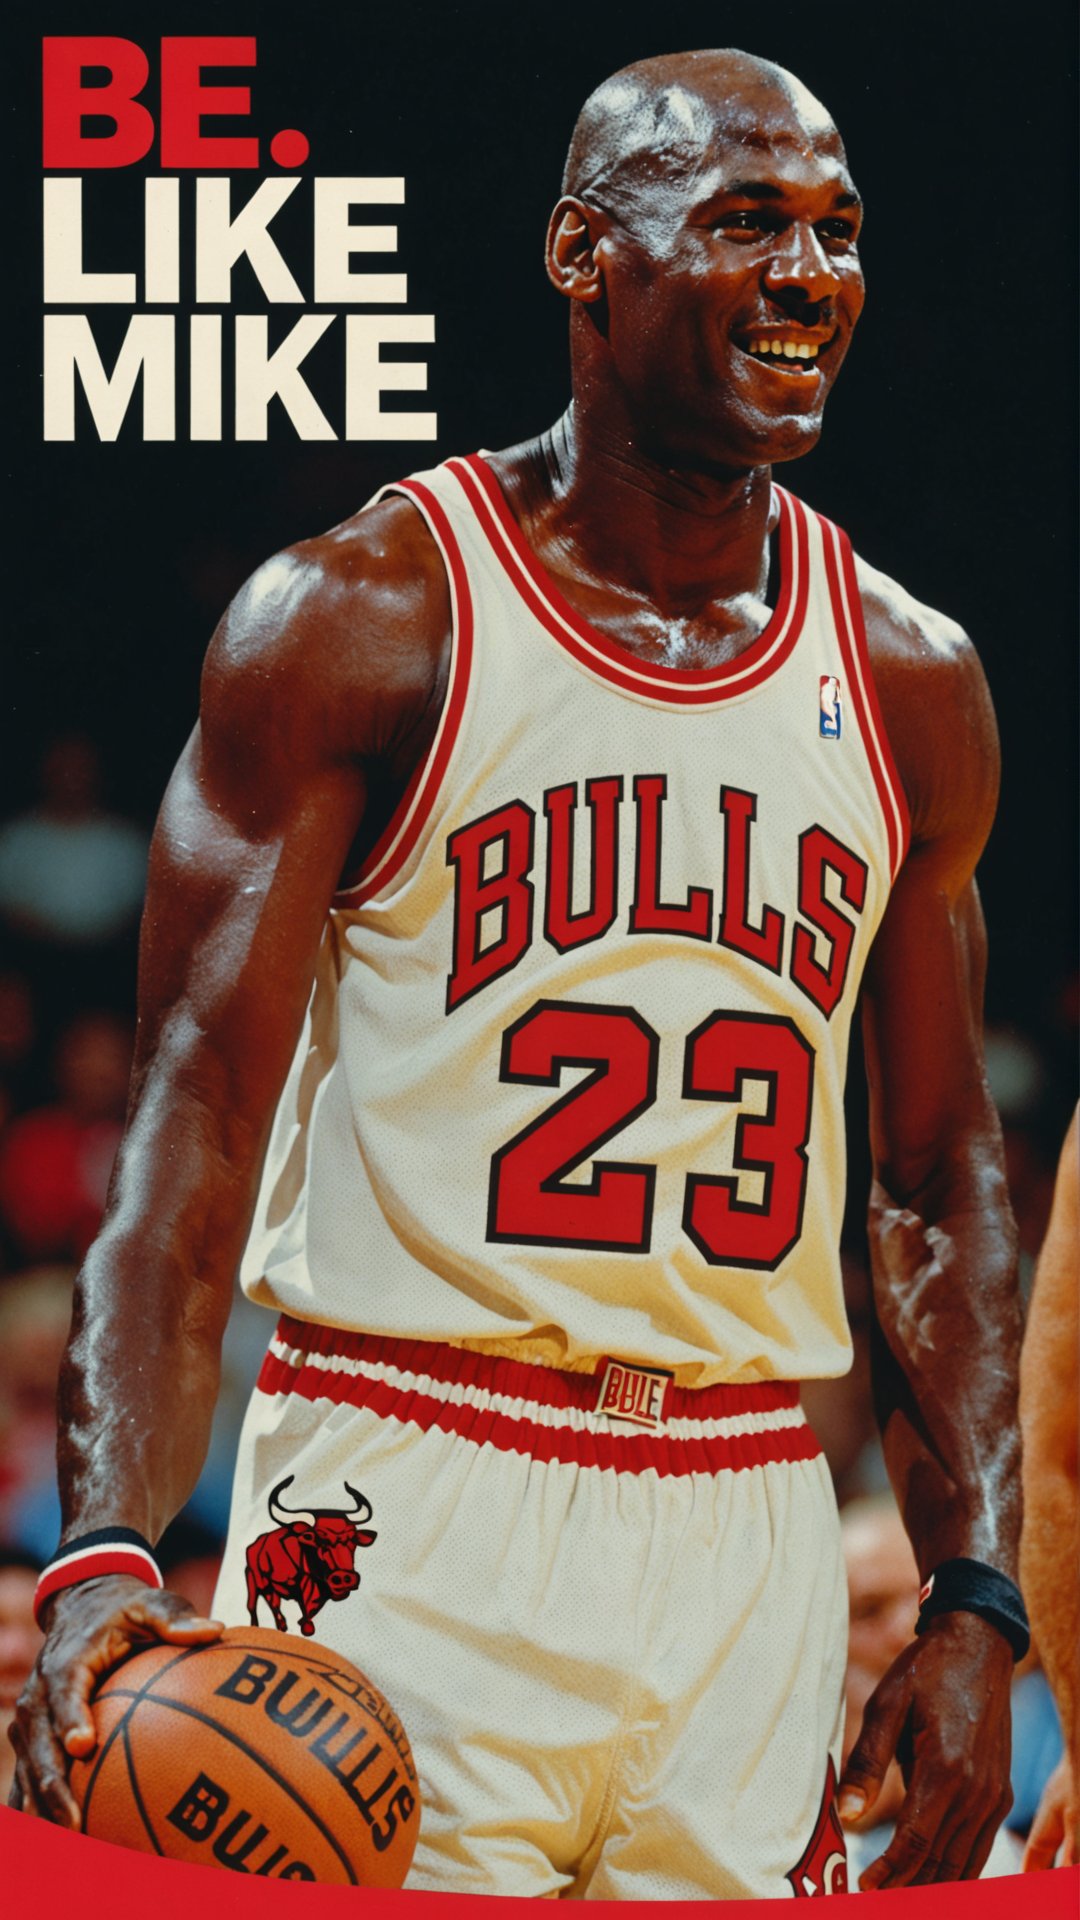 Photo of Michael Jordan wearing Bulls jersey with basketball text bubble that says "Be like Mike"